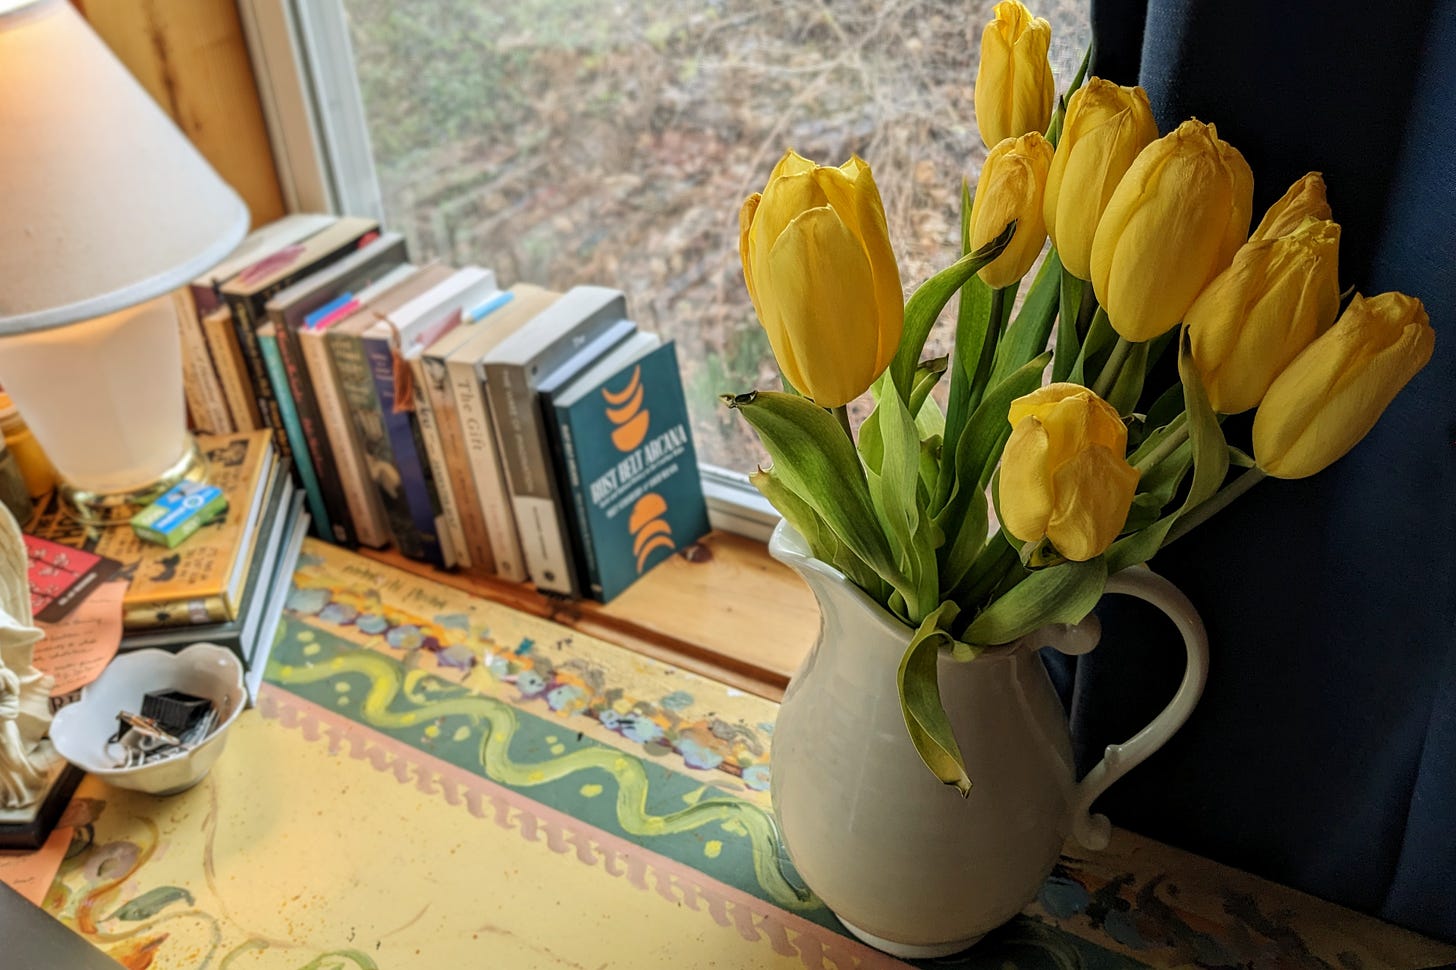 Yellow tulips in a cream-colored vase sit on a colorful desk that's been handpainted. In the background, a row of books rests on the window sill.